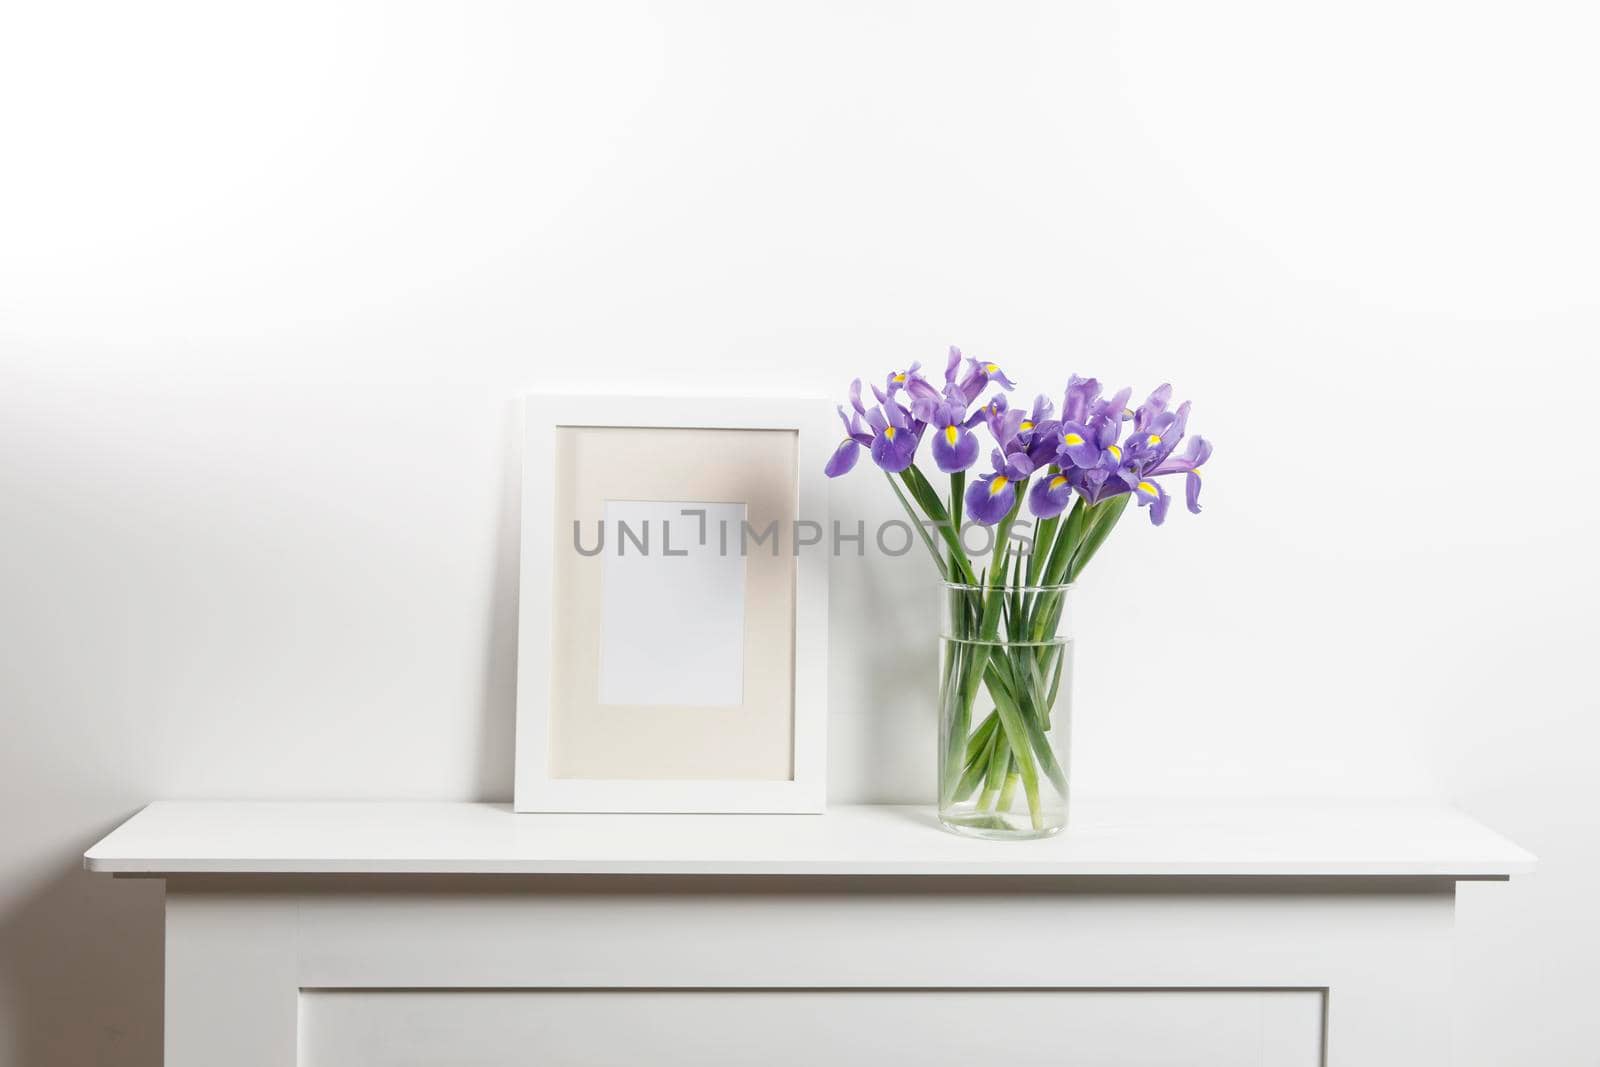 Bouquets of irises in a vase, photo frames on a chest of drawers by elenarostunova